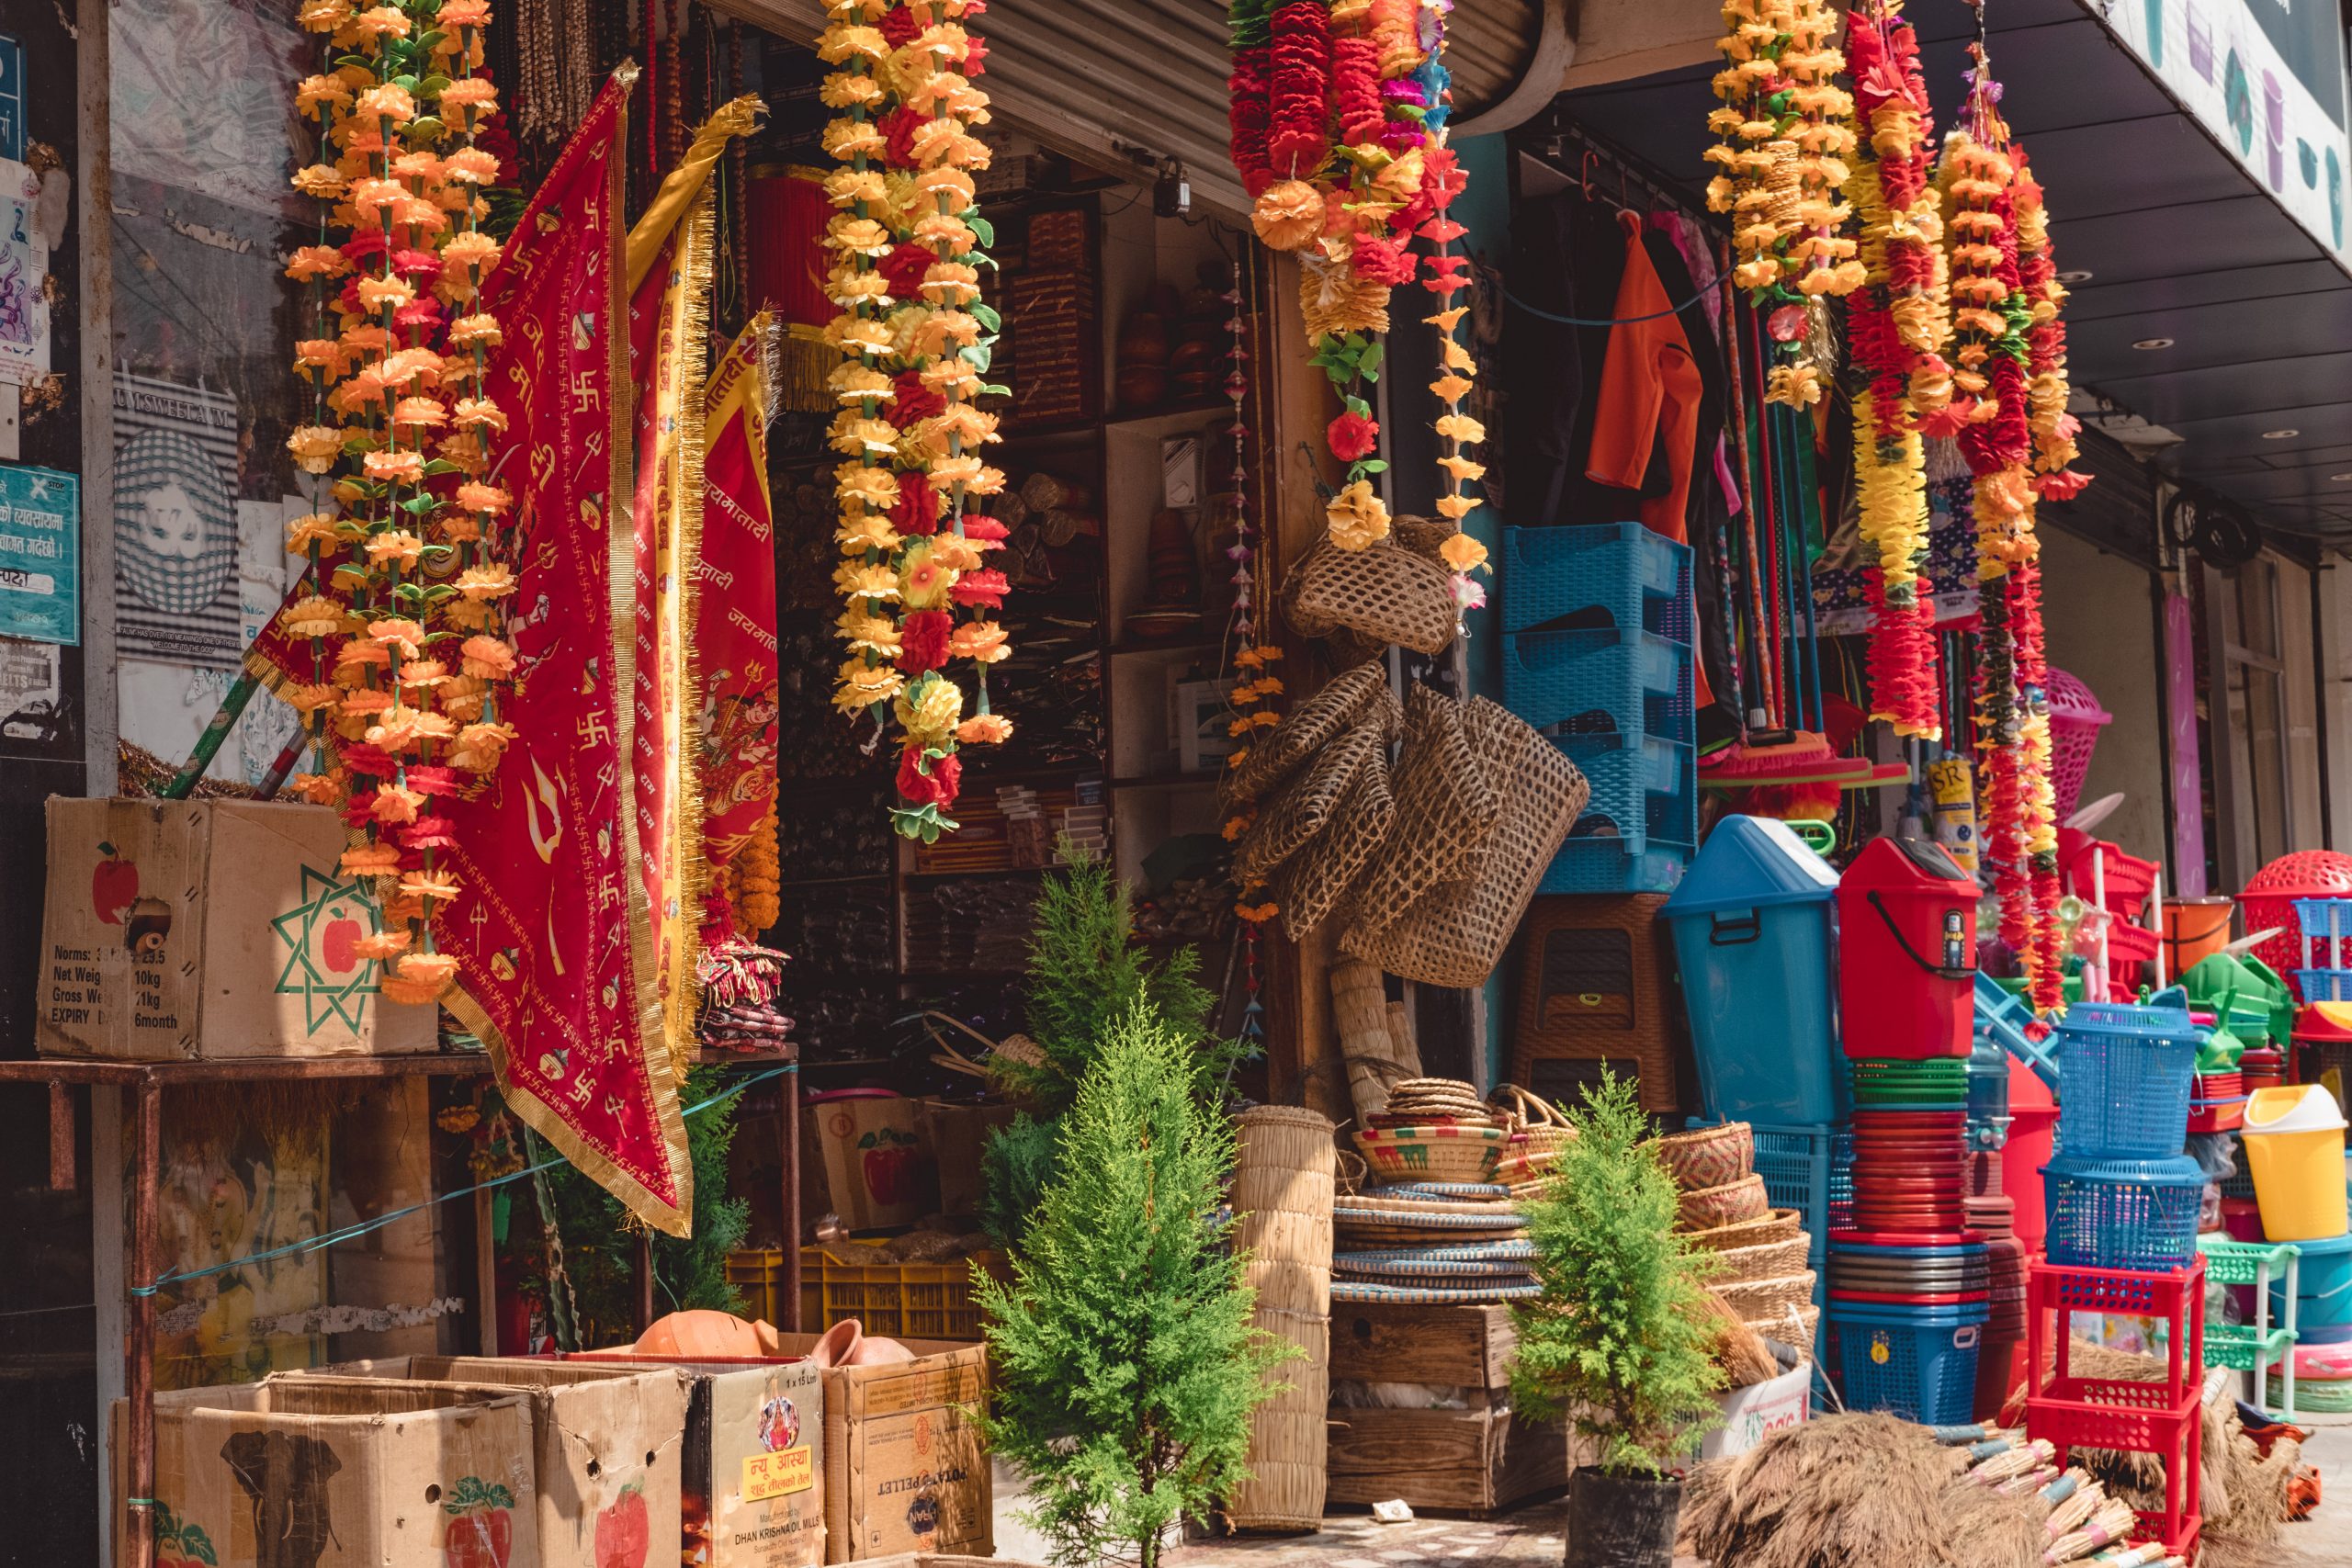 Colourful products in Nepal